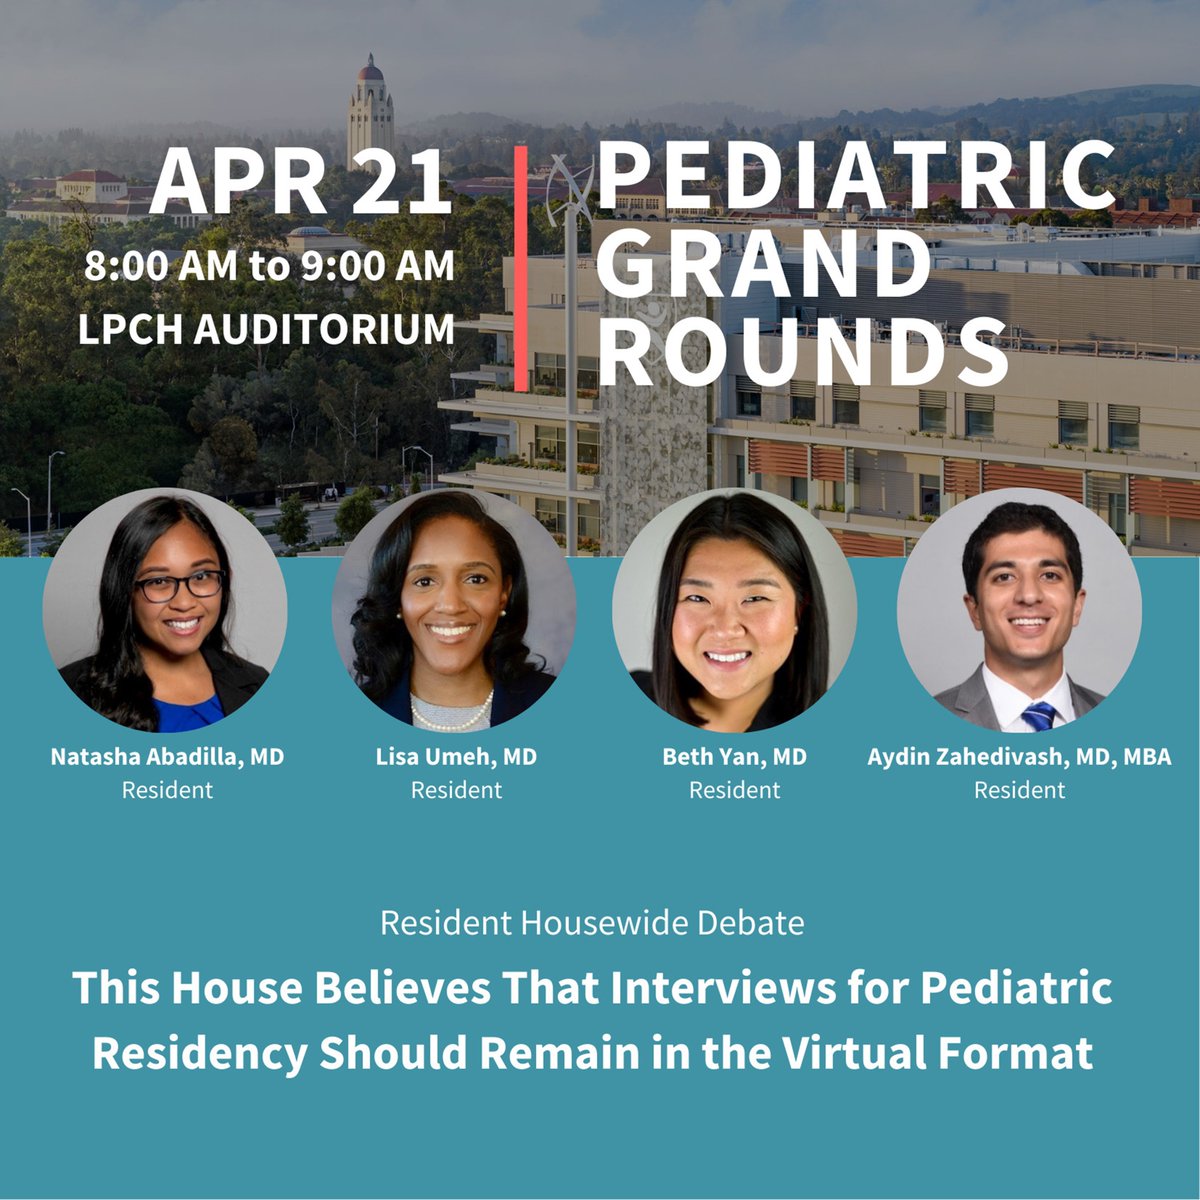 Join us this morning for #pedsgrandrounds with the Resident Housewide Debate: This House Believes That Interviews for Pediatric Residency Should Remain in the Virtual Format @StanfordChild LPCH Auditorium at 8 AM! @stanfordpedsres